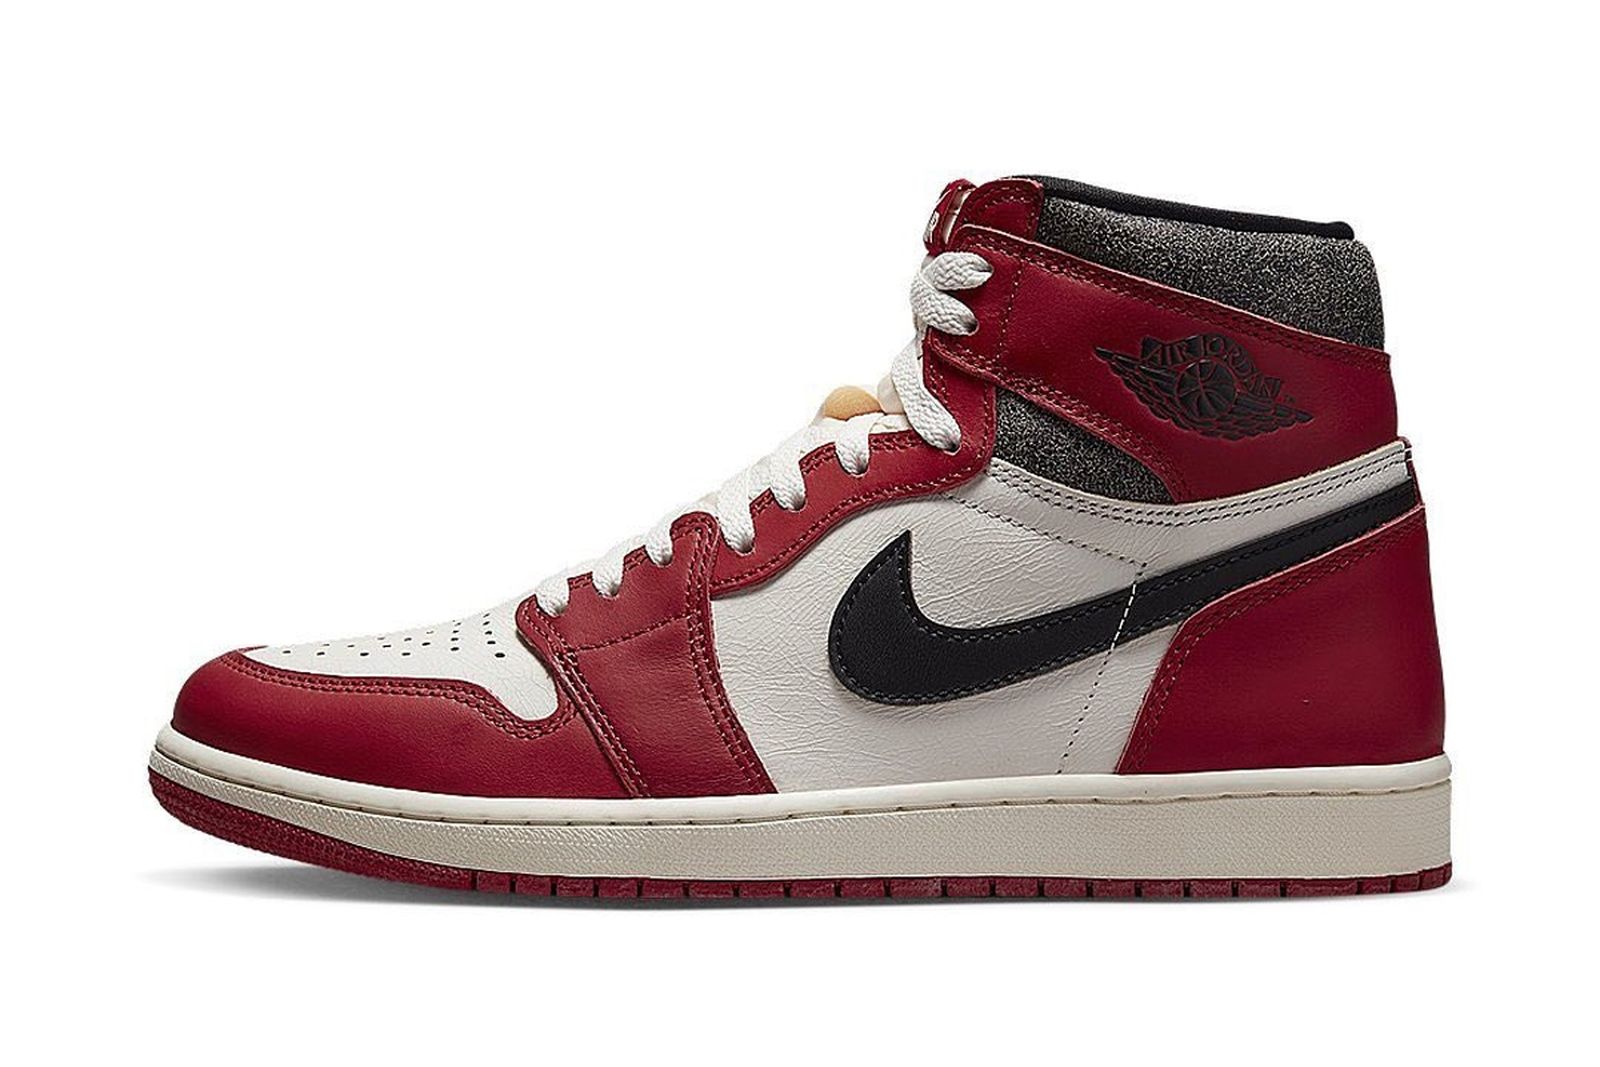 Nike Is Turning SNKRS Losses Into Air Jordan 1 “Chicago” Wins